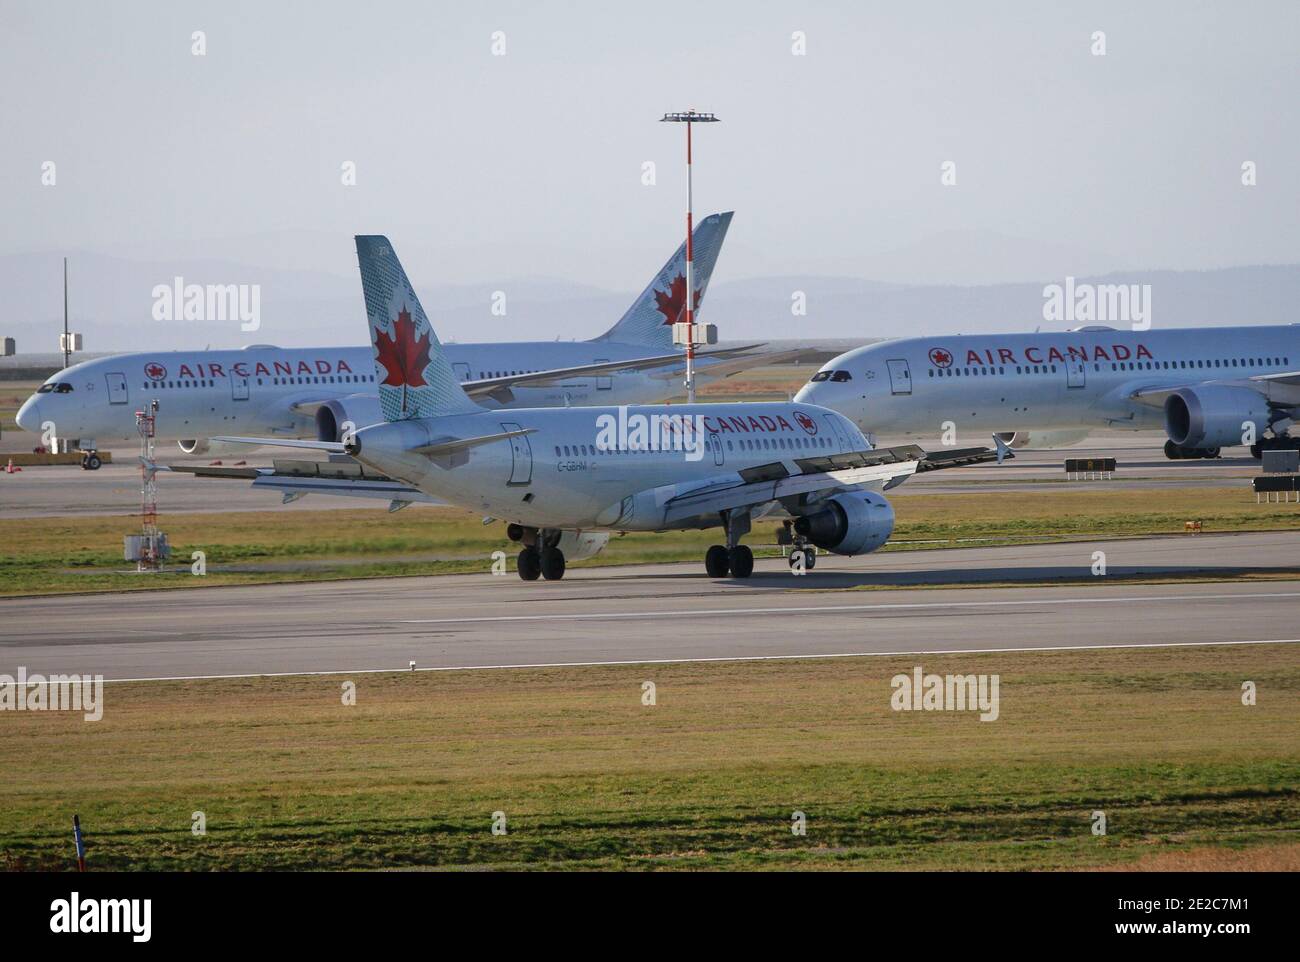 Richmond, Canada. 13th Jan, 2021. Air Canada aircrafts are seen on the runway of Vancouver International Airport in Richmond, British Columbia, Canada, Jan. 13, 2021. Air Canada announced on Wednesday that it is laying off about 1,700 employees due to official travel restrictions against the rampaging COVID-19 pandemic. Credit: Liang Sen/Xinhua/Alamy Live News Stock Photo